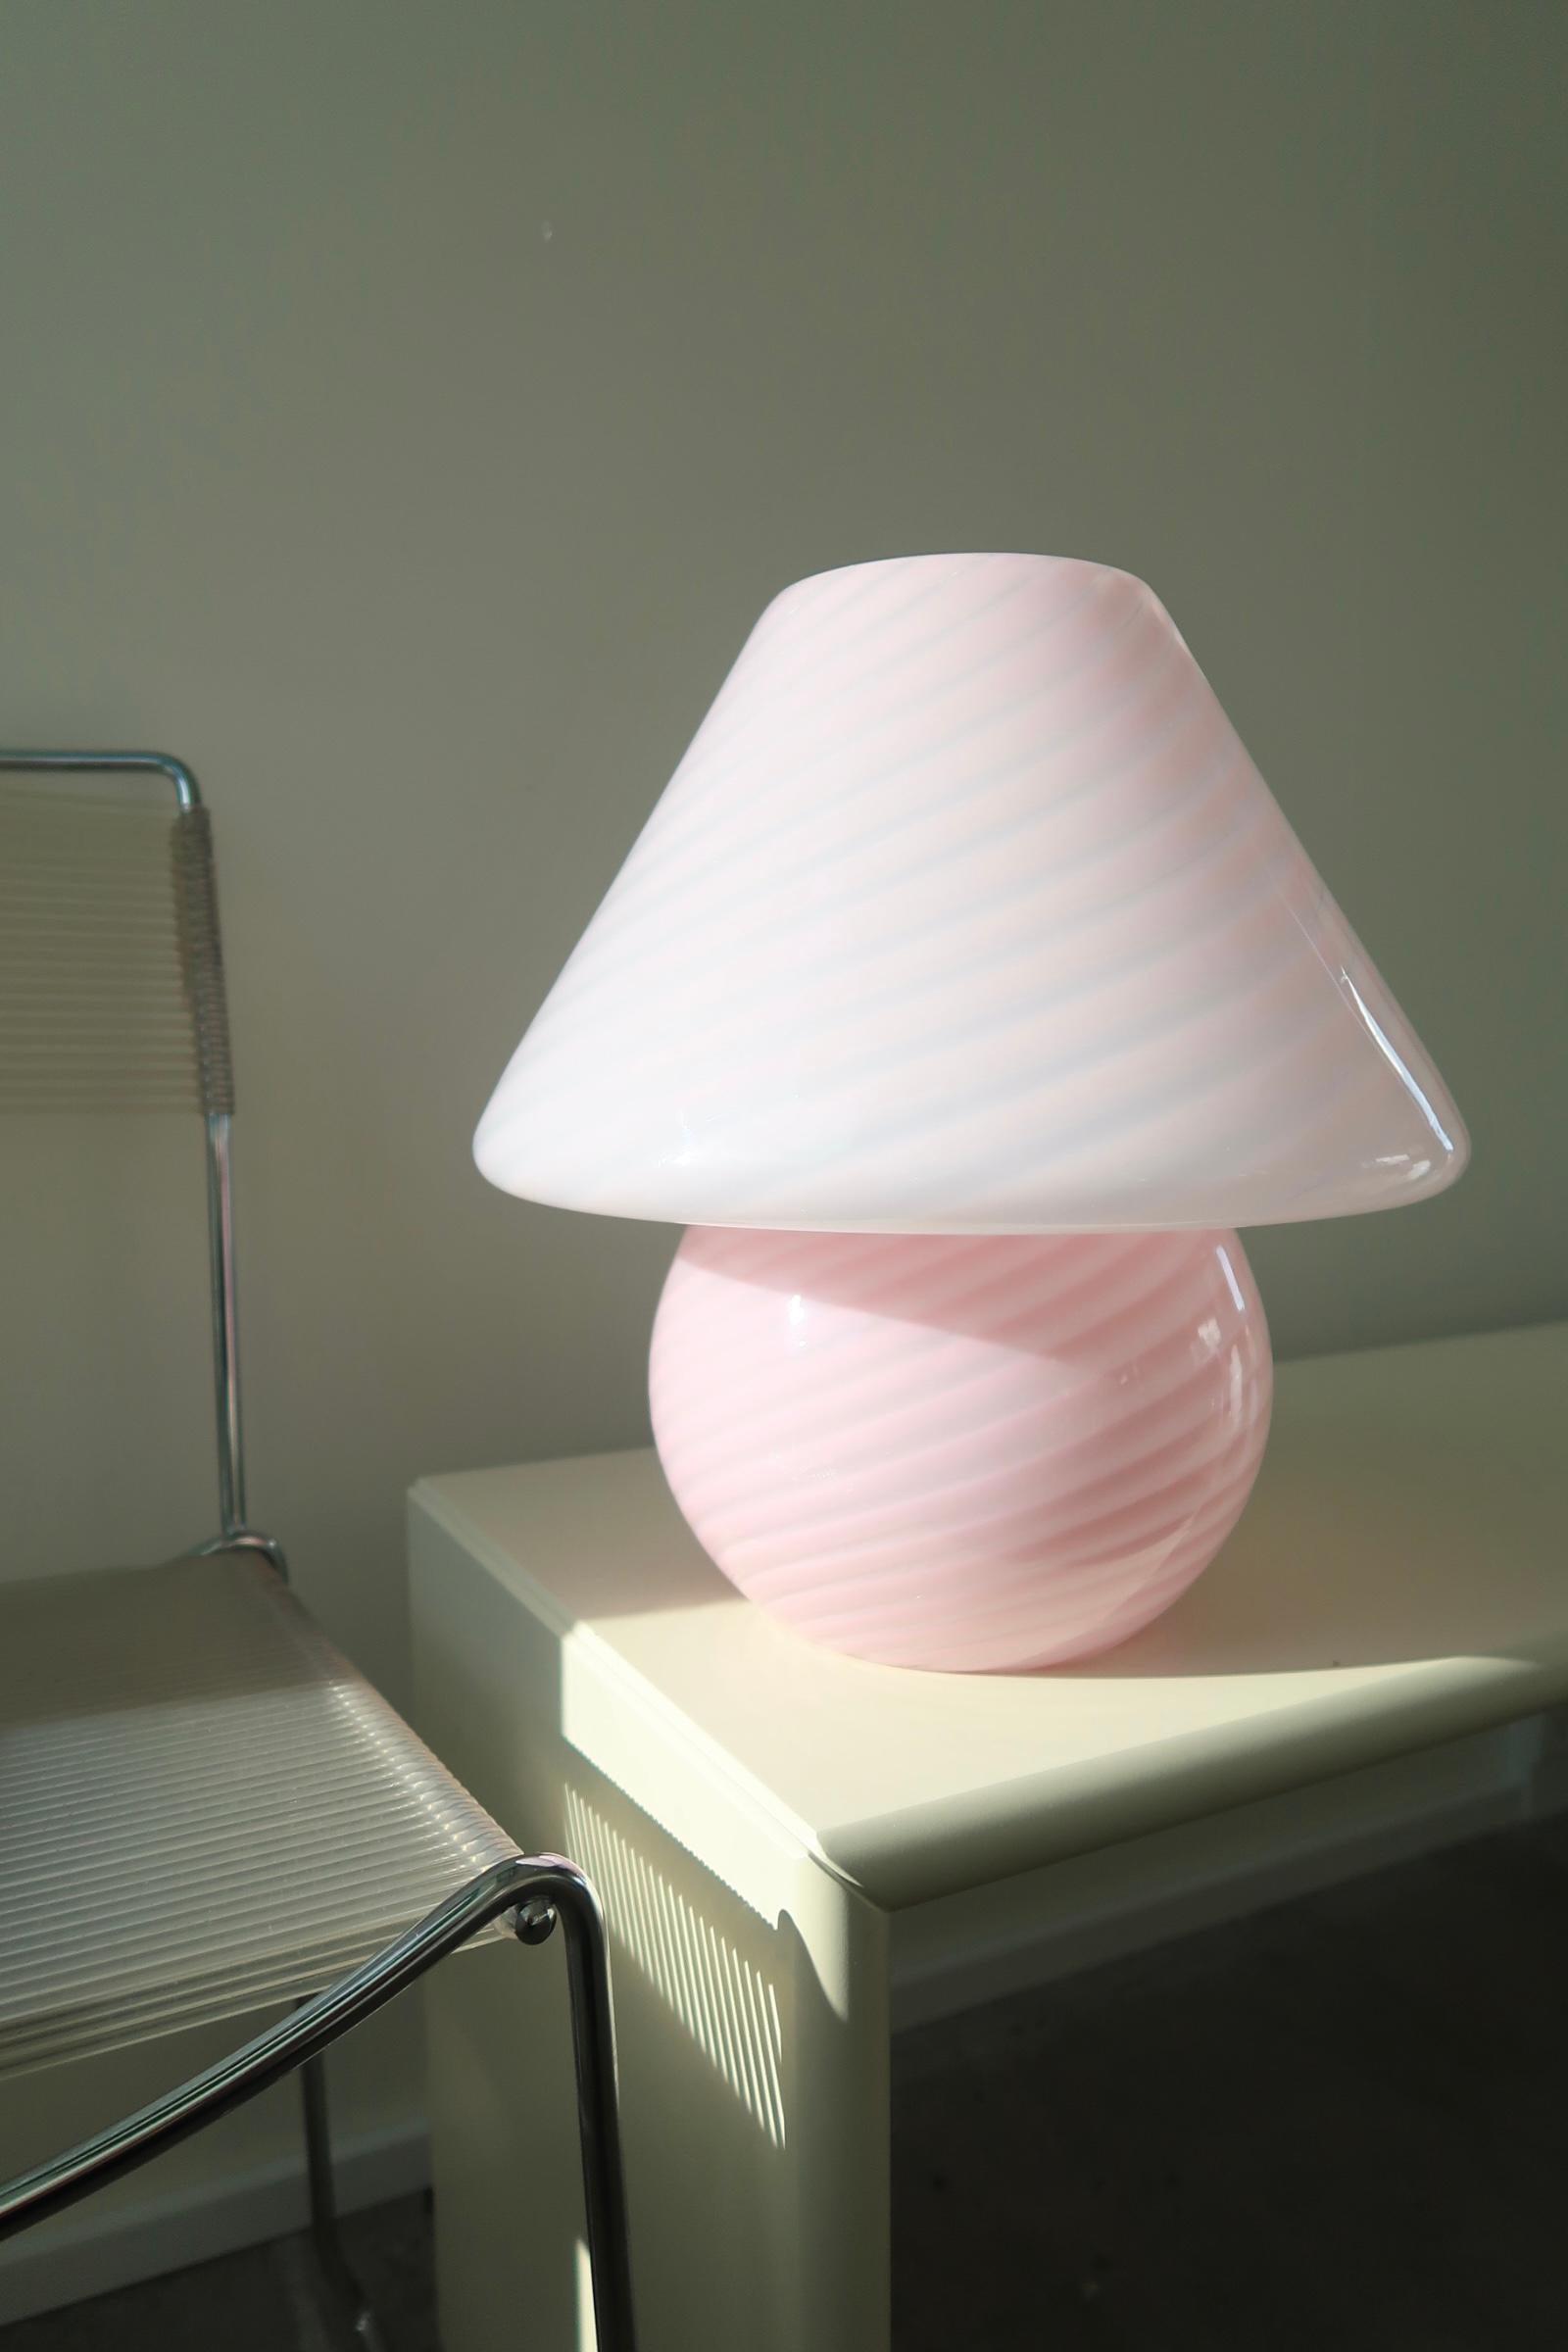 Extra large vintage Murano mushroom lamp in the most amazing pink / bubble gum shade. The lamp is mouth-blown in one piece of glass with a swirl and gives a really cozy light. Handmade in Italy, 1970s, and comes with new fabric cord.
Measures: H:38